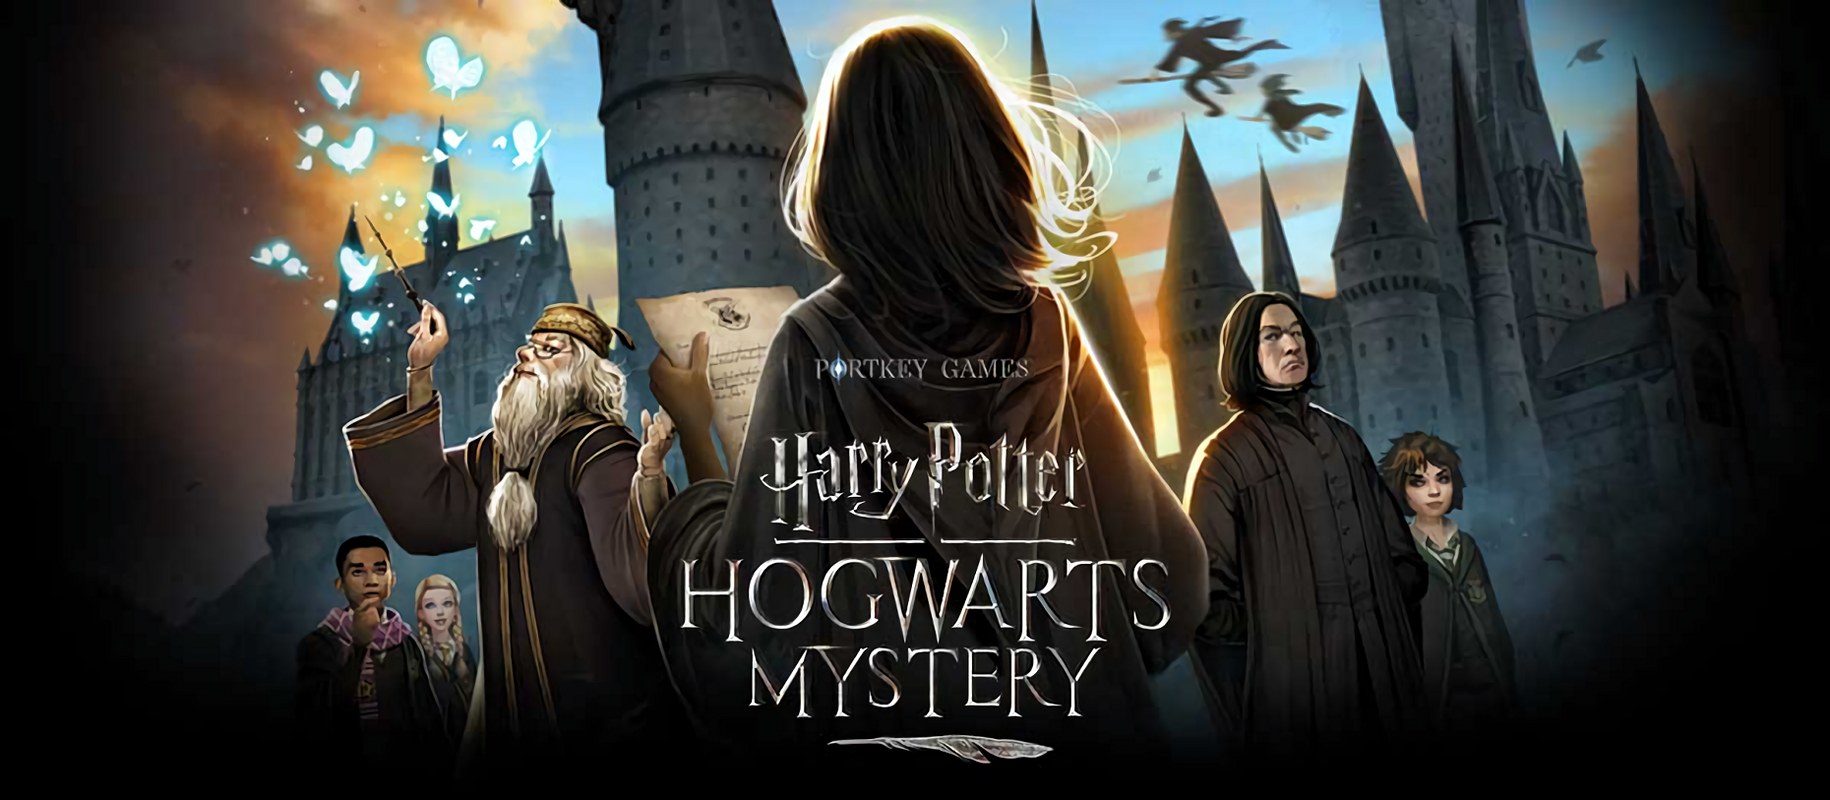 Hogwarts Mystery is the top-grossing Harry Potter mobile game, the cover of which can be seen in this image. On the left, Dumbledore is casting a spell and making butterflies appear, and next to him is a young African American apprentice and white female apprentice. In the front of the picture is a young female wizard with her back to us, and on the right is Snape, with a young white female apprentice next to him. The back of the image shows the architecture of the Hogwarts School in a sunset setting.